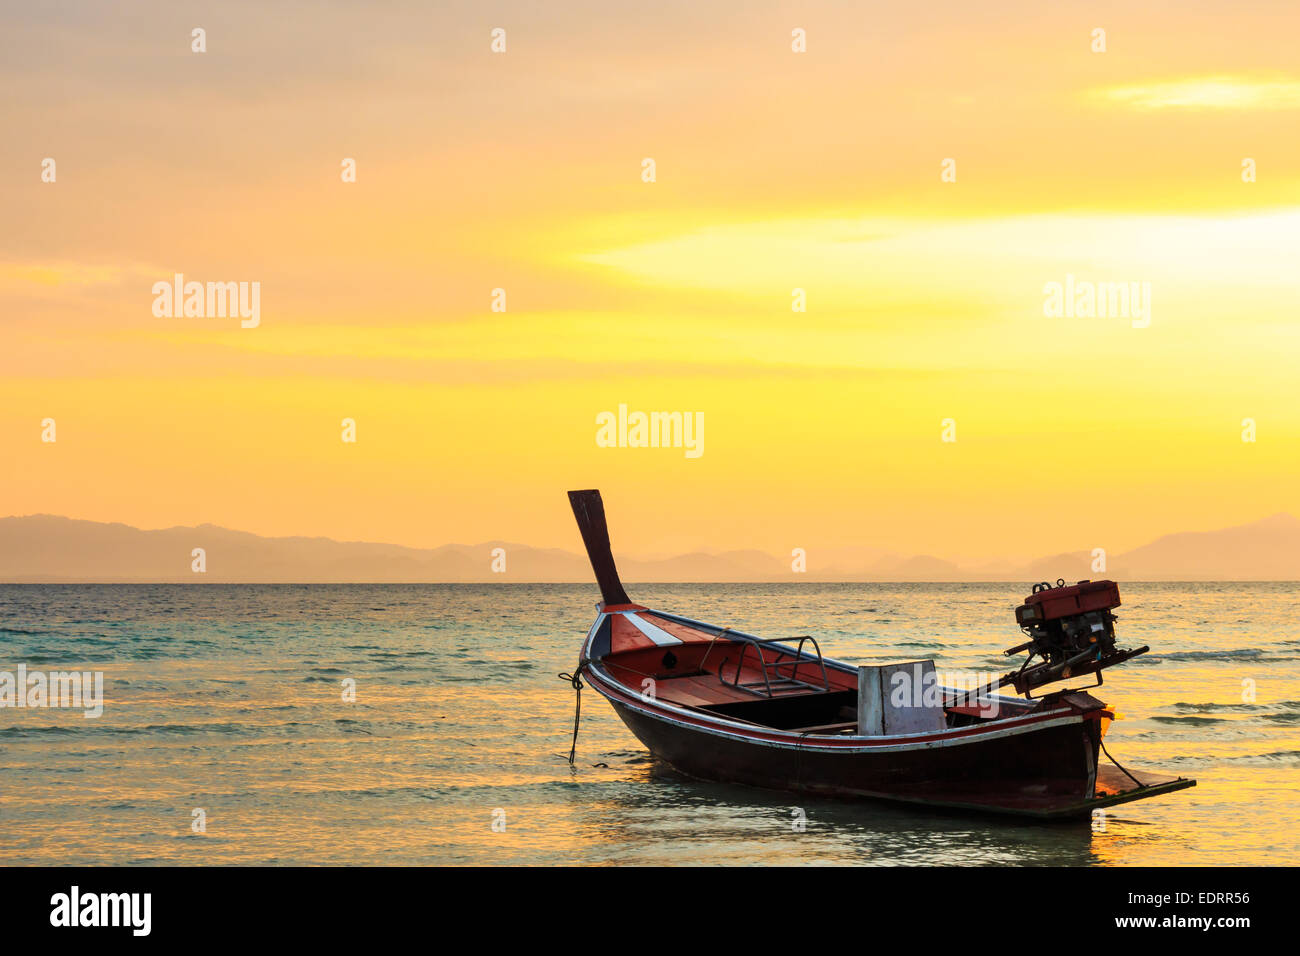 native boat on beach and sunrise in morning at Trang ,Thailand Stock Photo